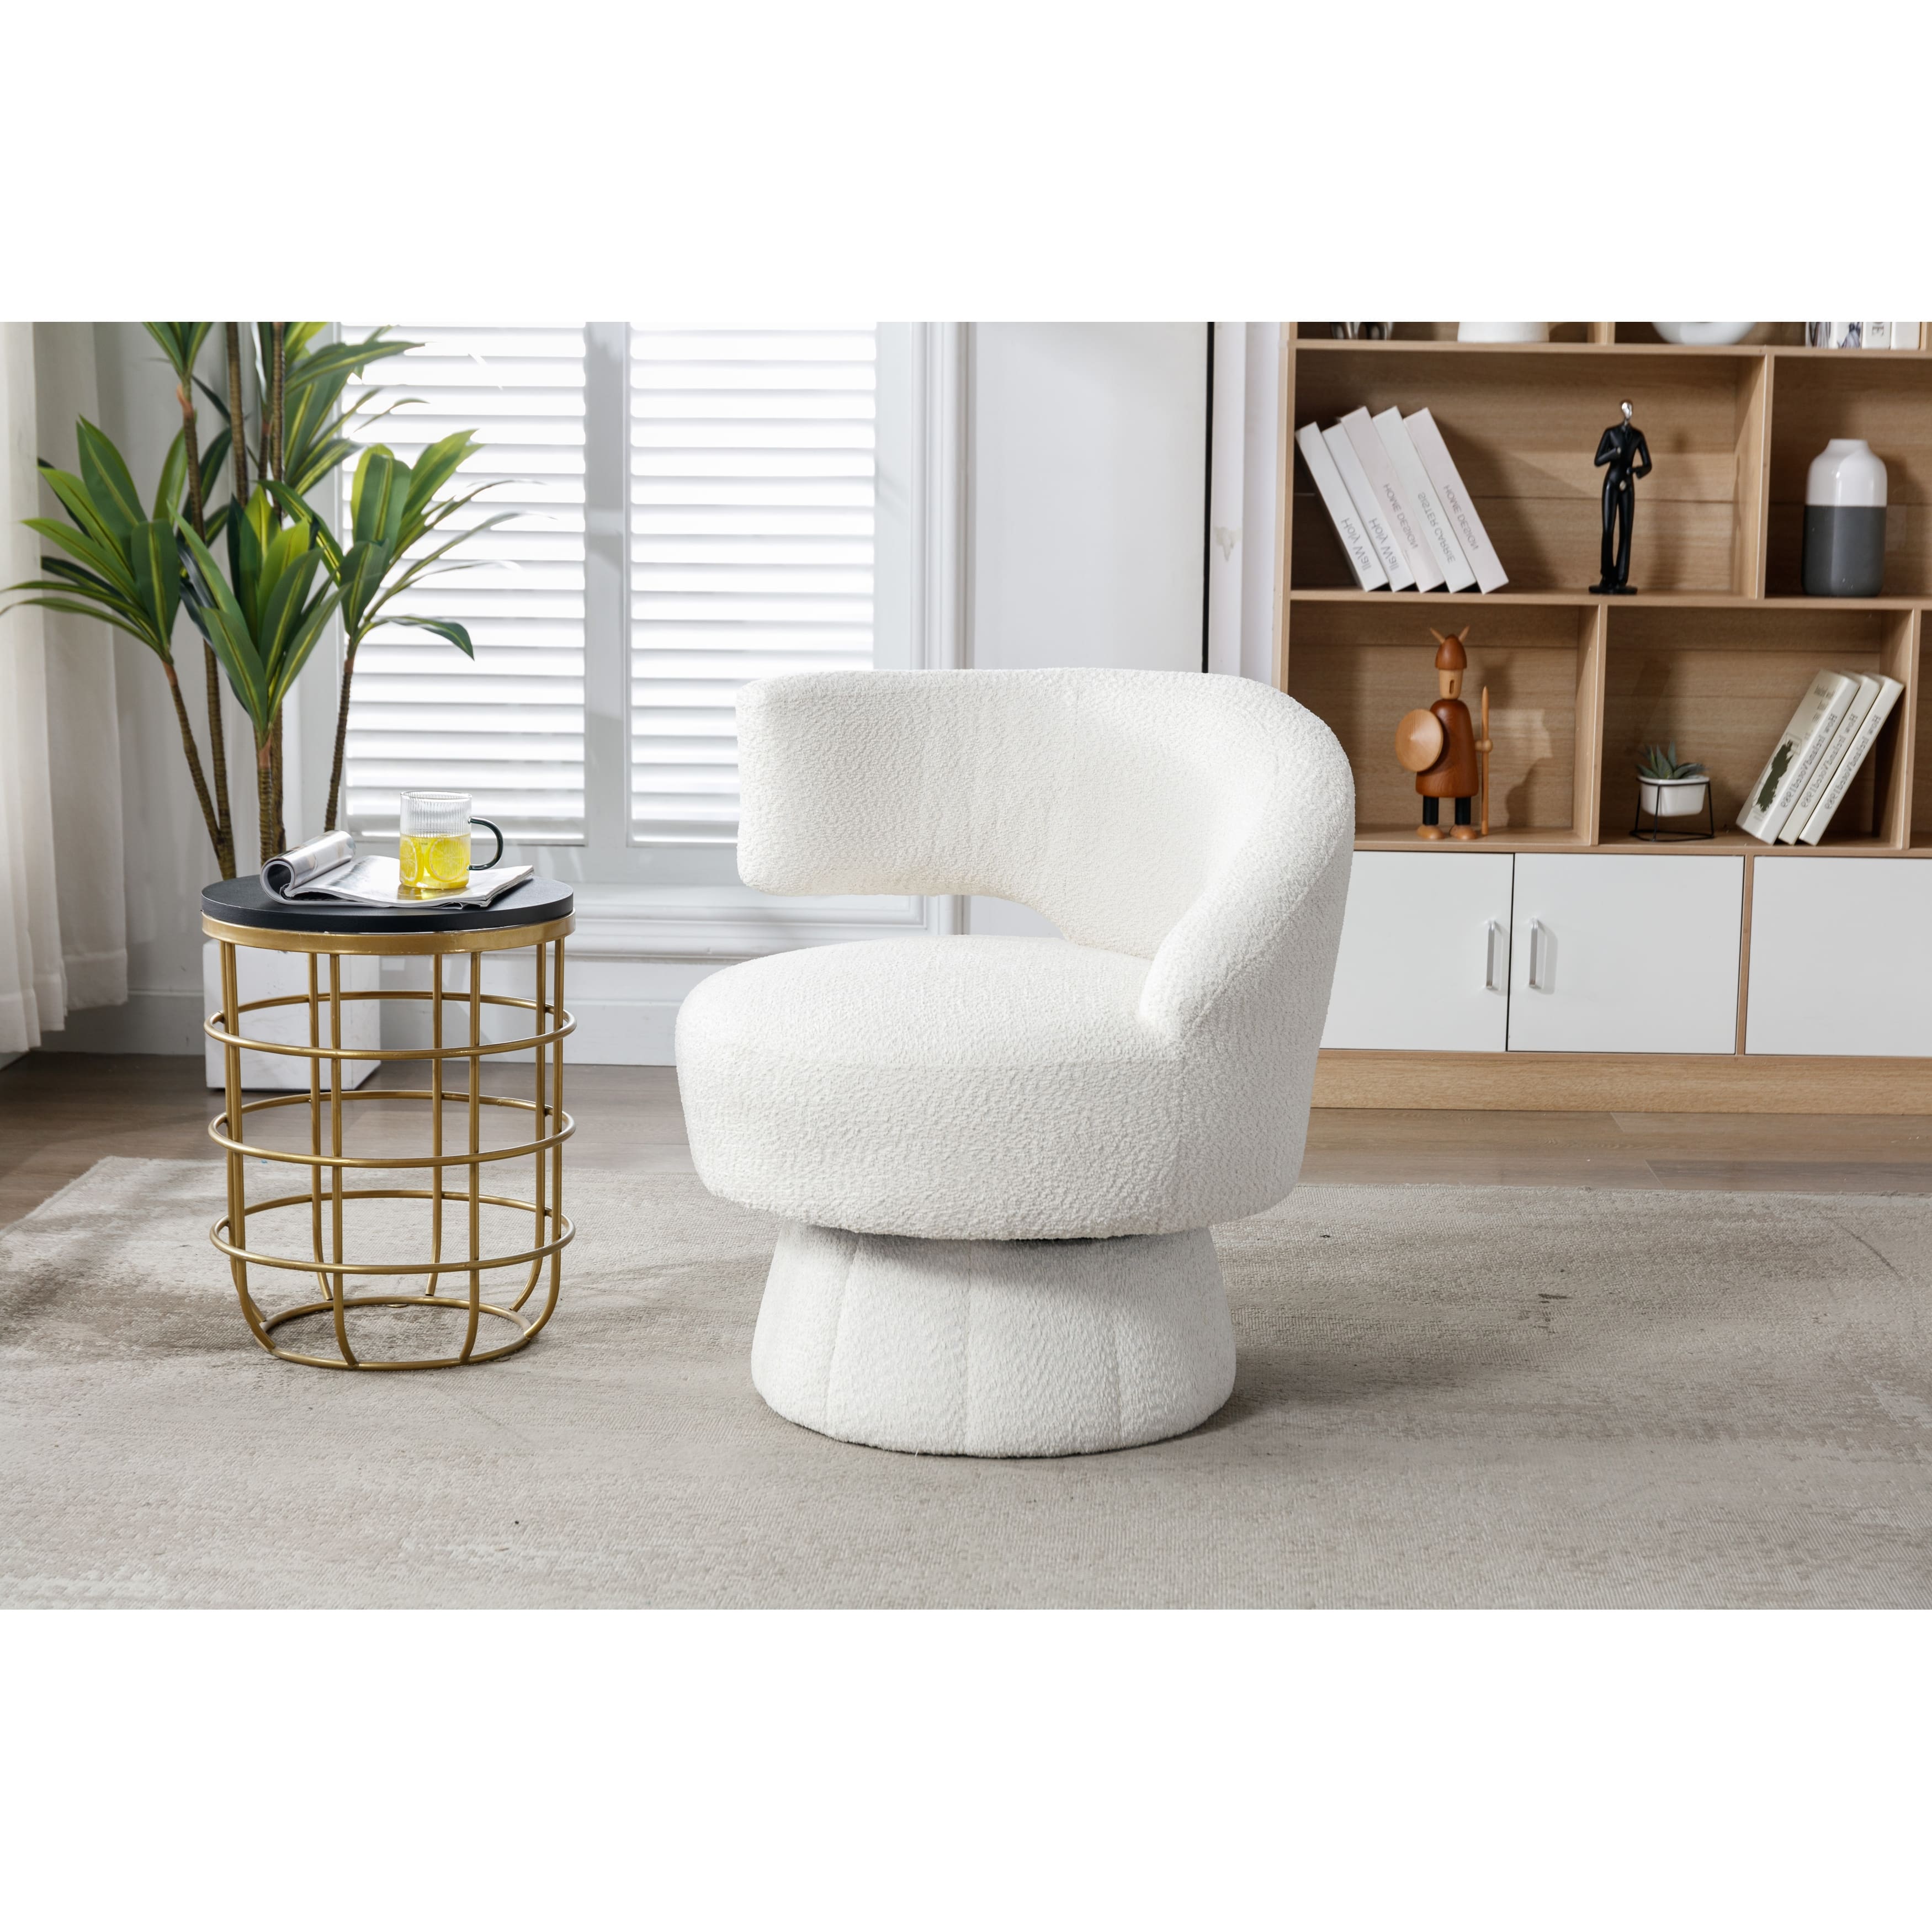 Chenille Swivel Barrel Chairs Beige Cuddle Semi-connected Accent ...